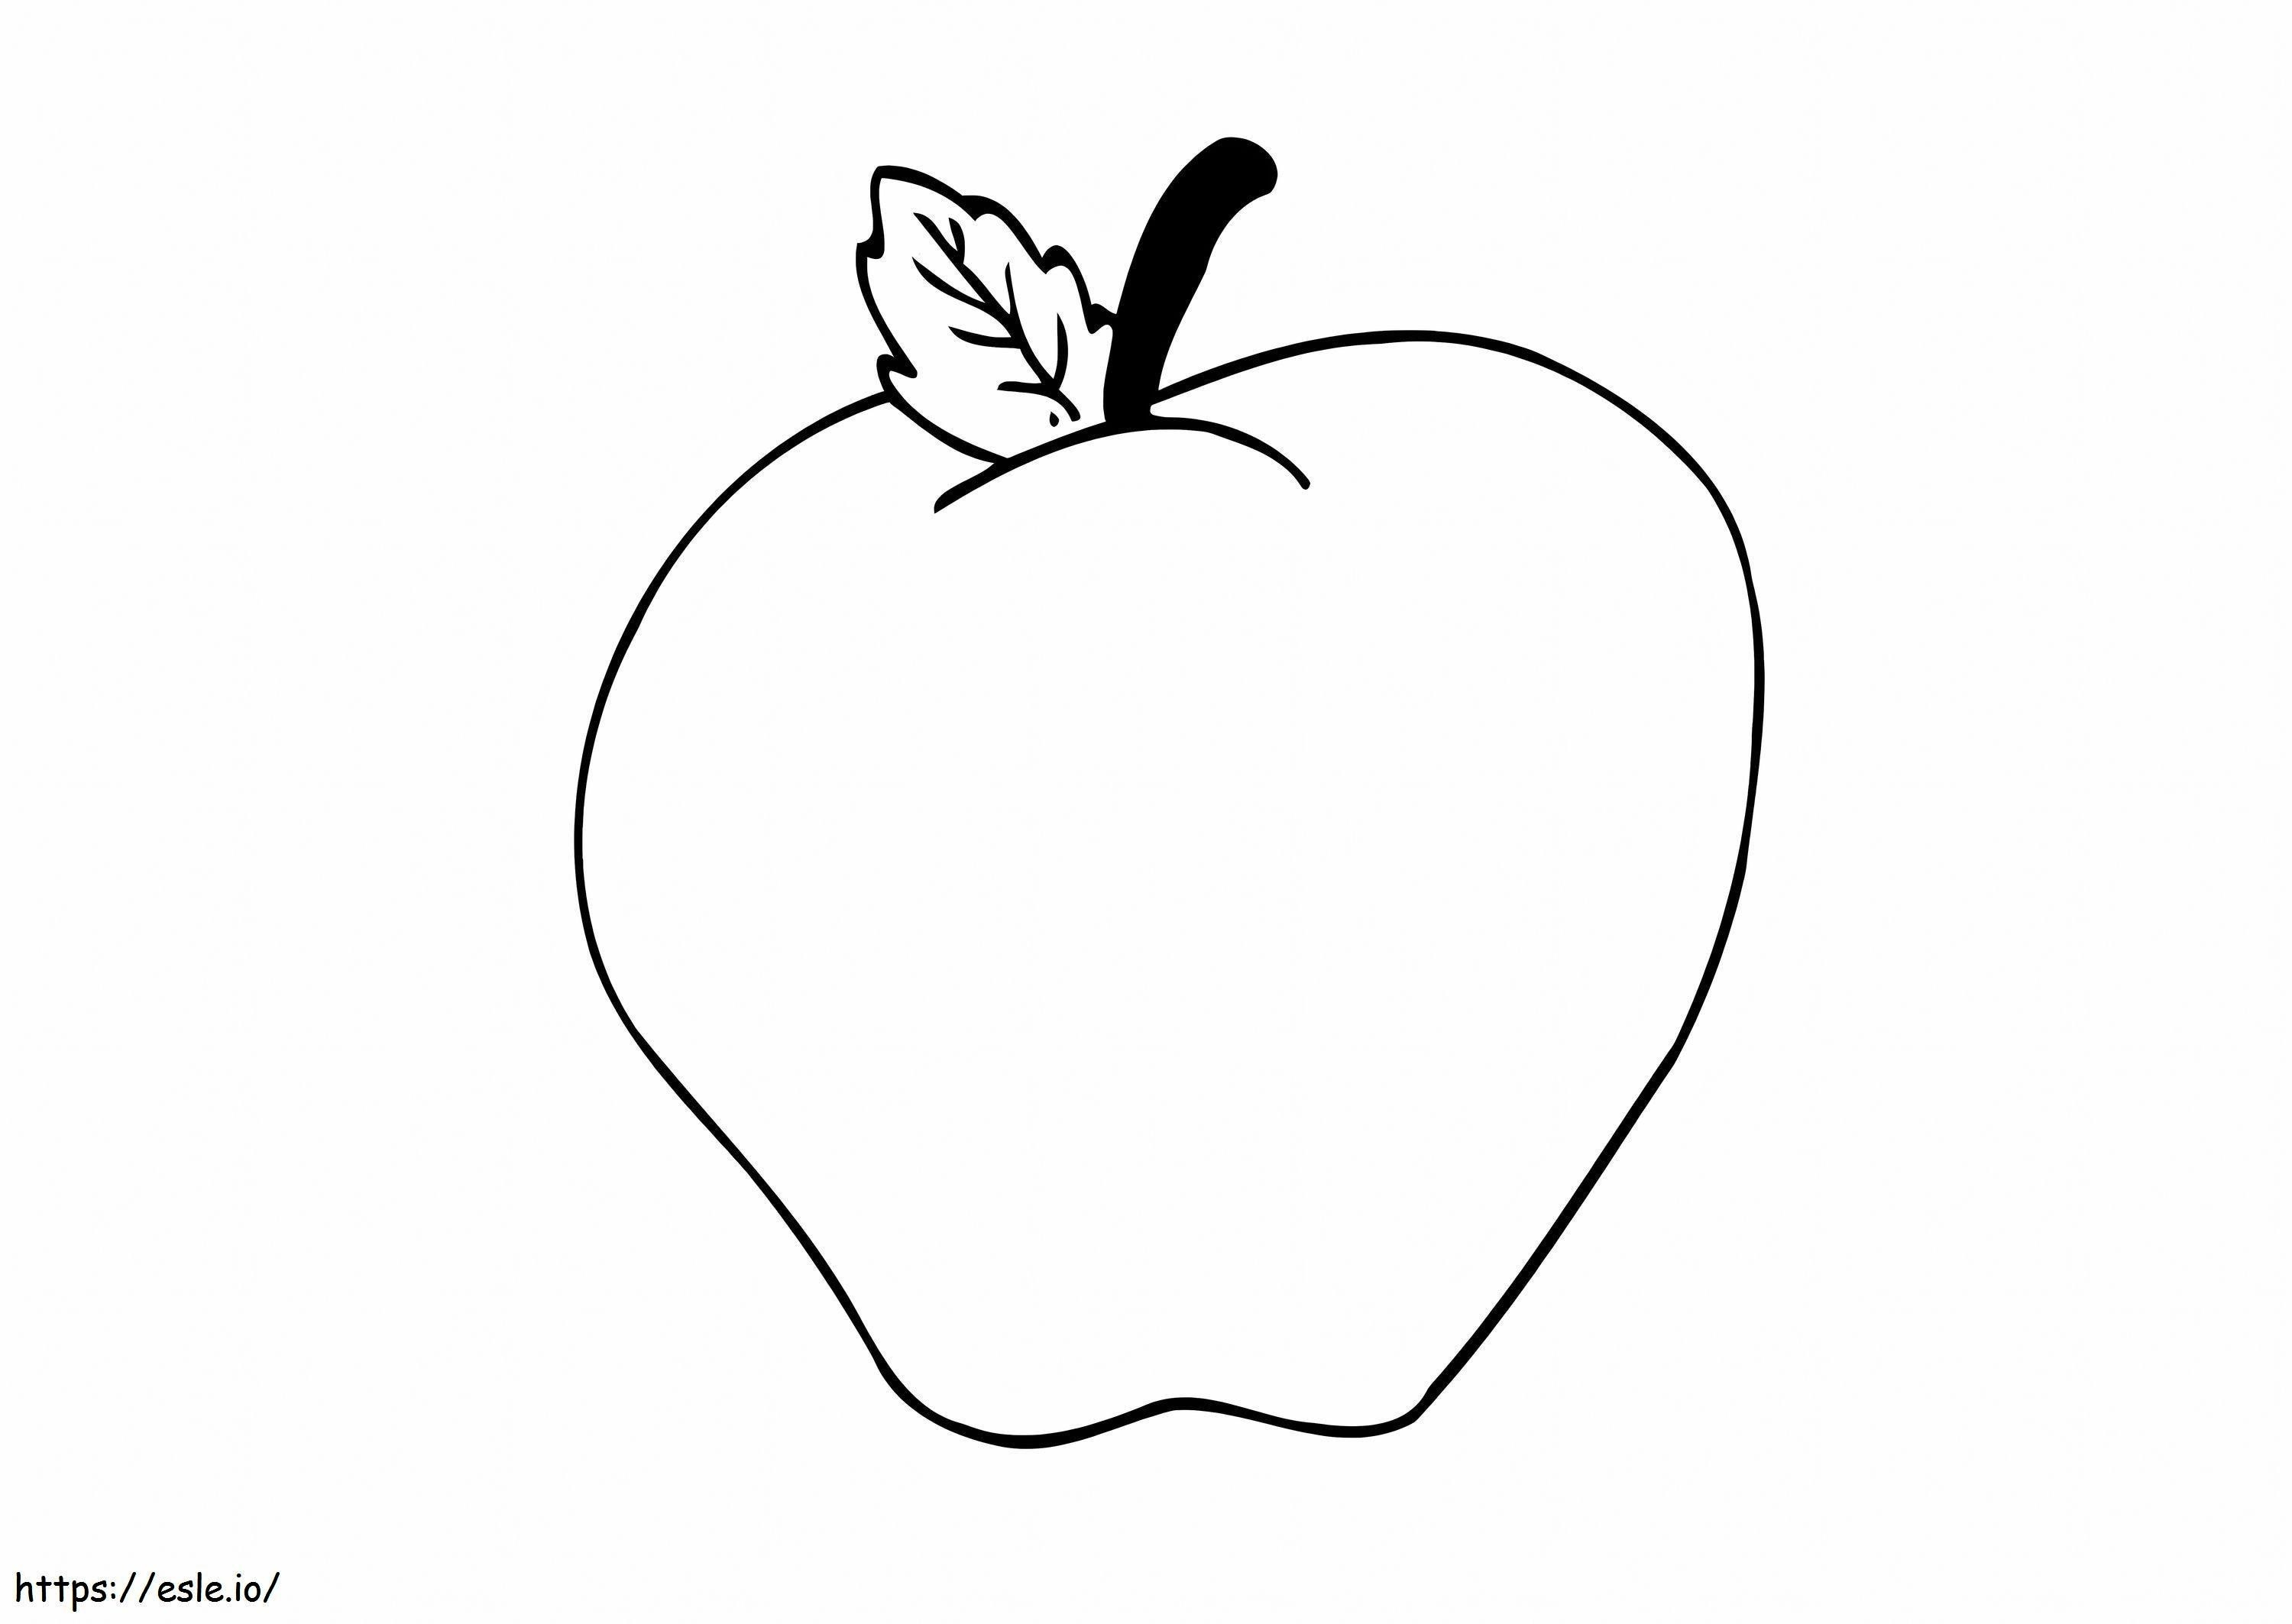 Apple Free Use coloring page